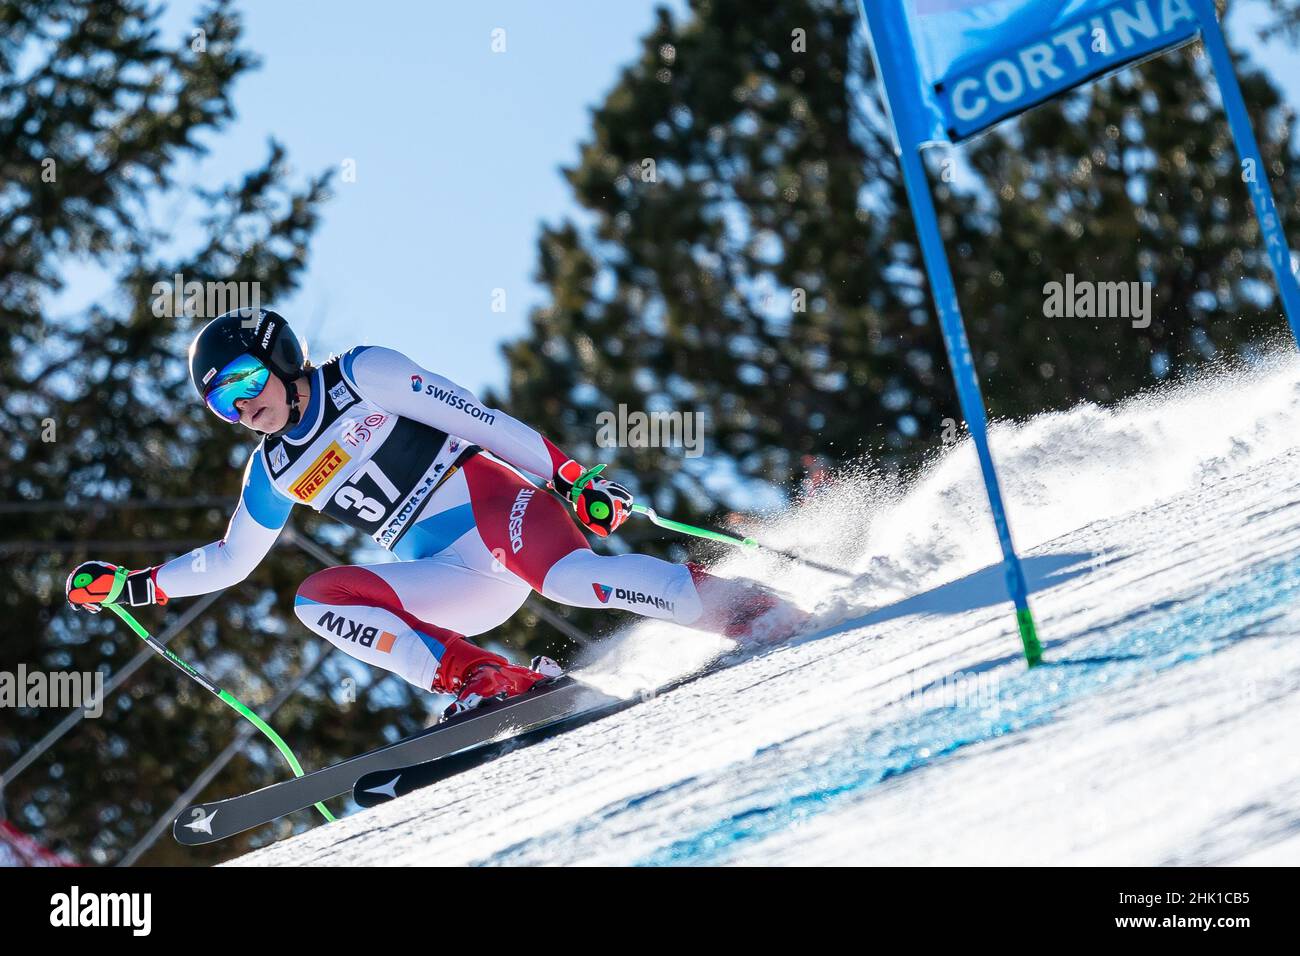 Cortina d'Ampezzo, Italy. 23 January 2022. JENAL Stephanie(SUI) competing in the Fis Alpine Ski World Cup Women's Super-G on the Olympia delle Tofane. Stock Photo